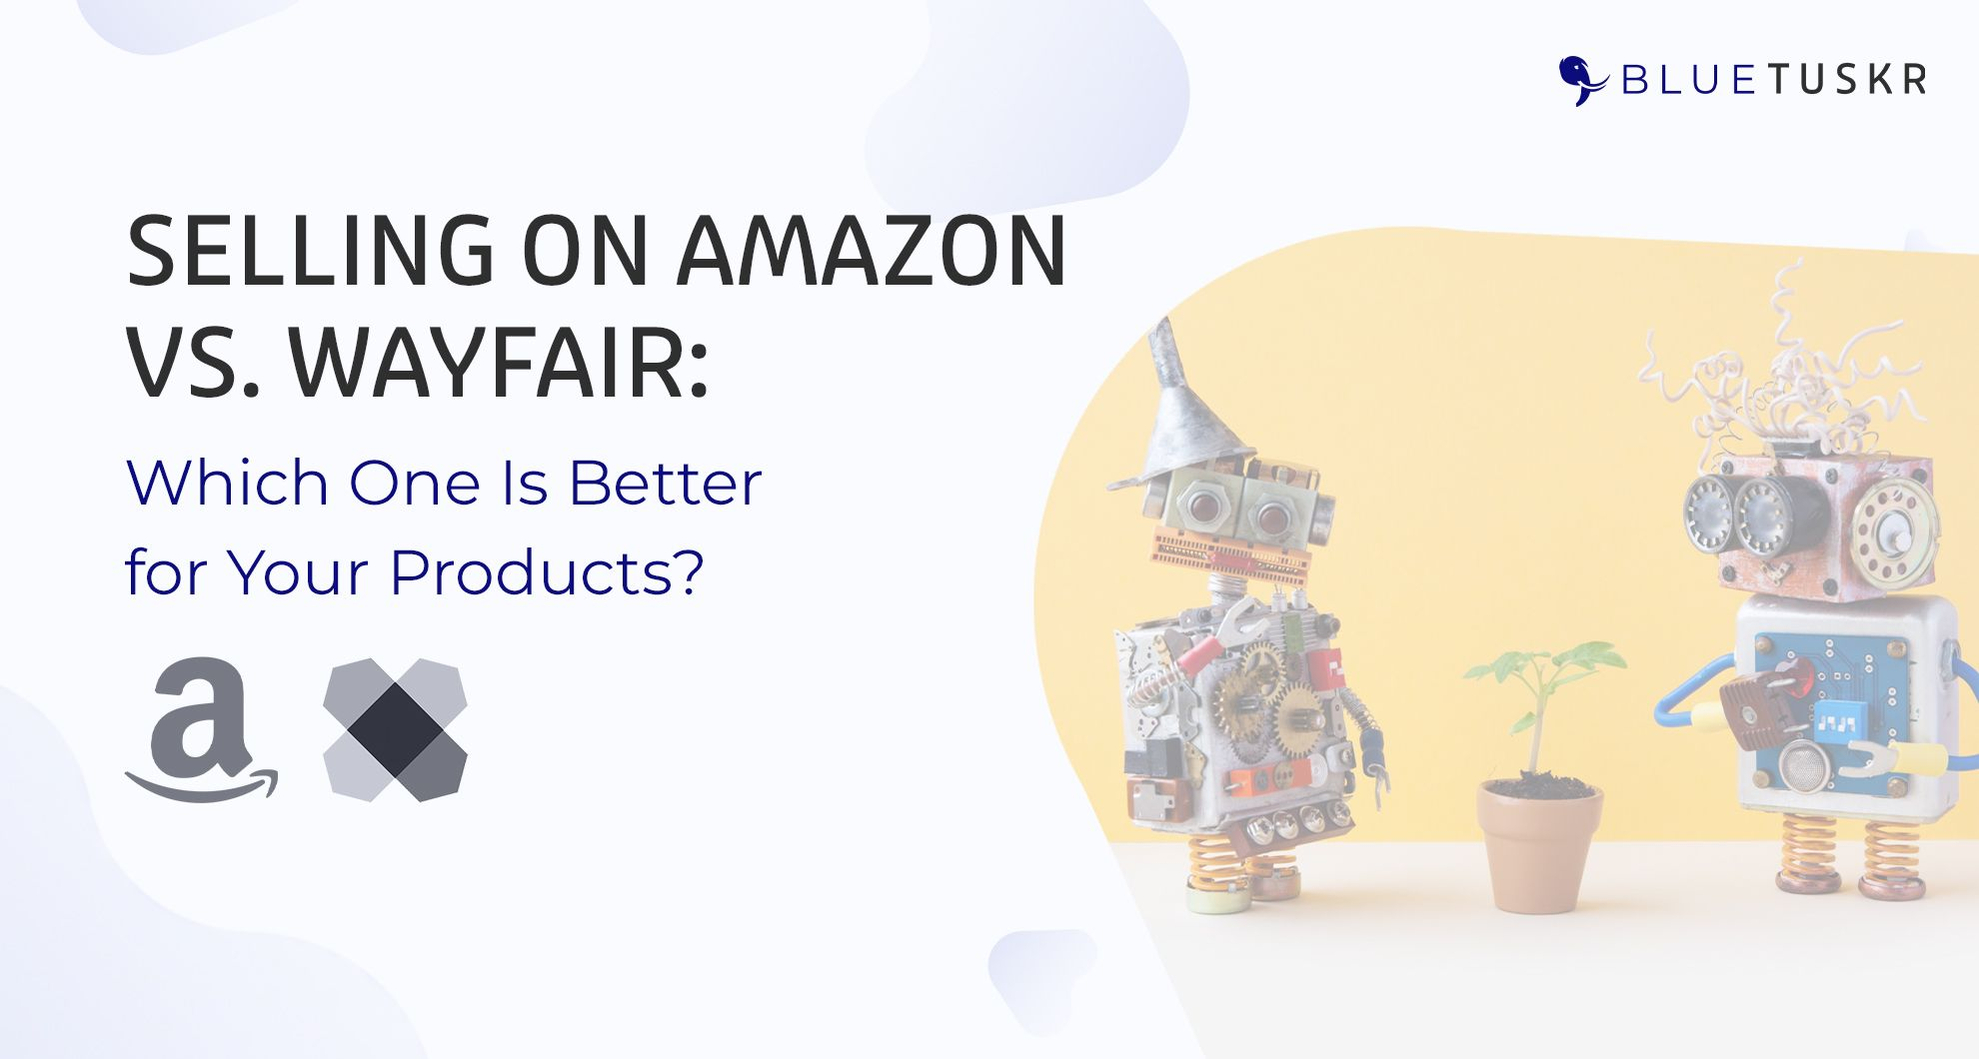 Selling on Amazon vs. Wayfair: Which One Is Better for Your Products?